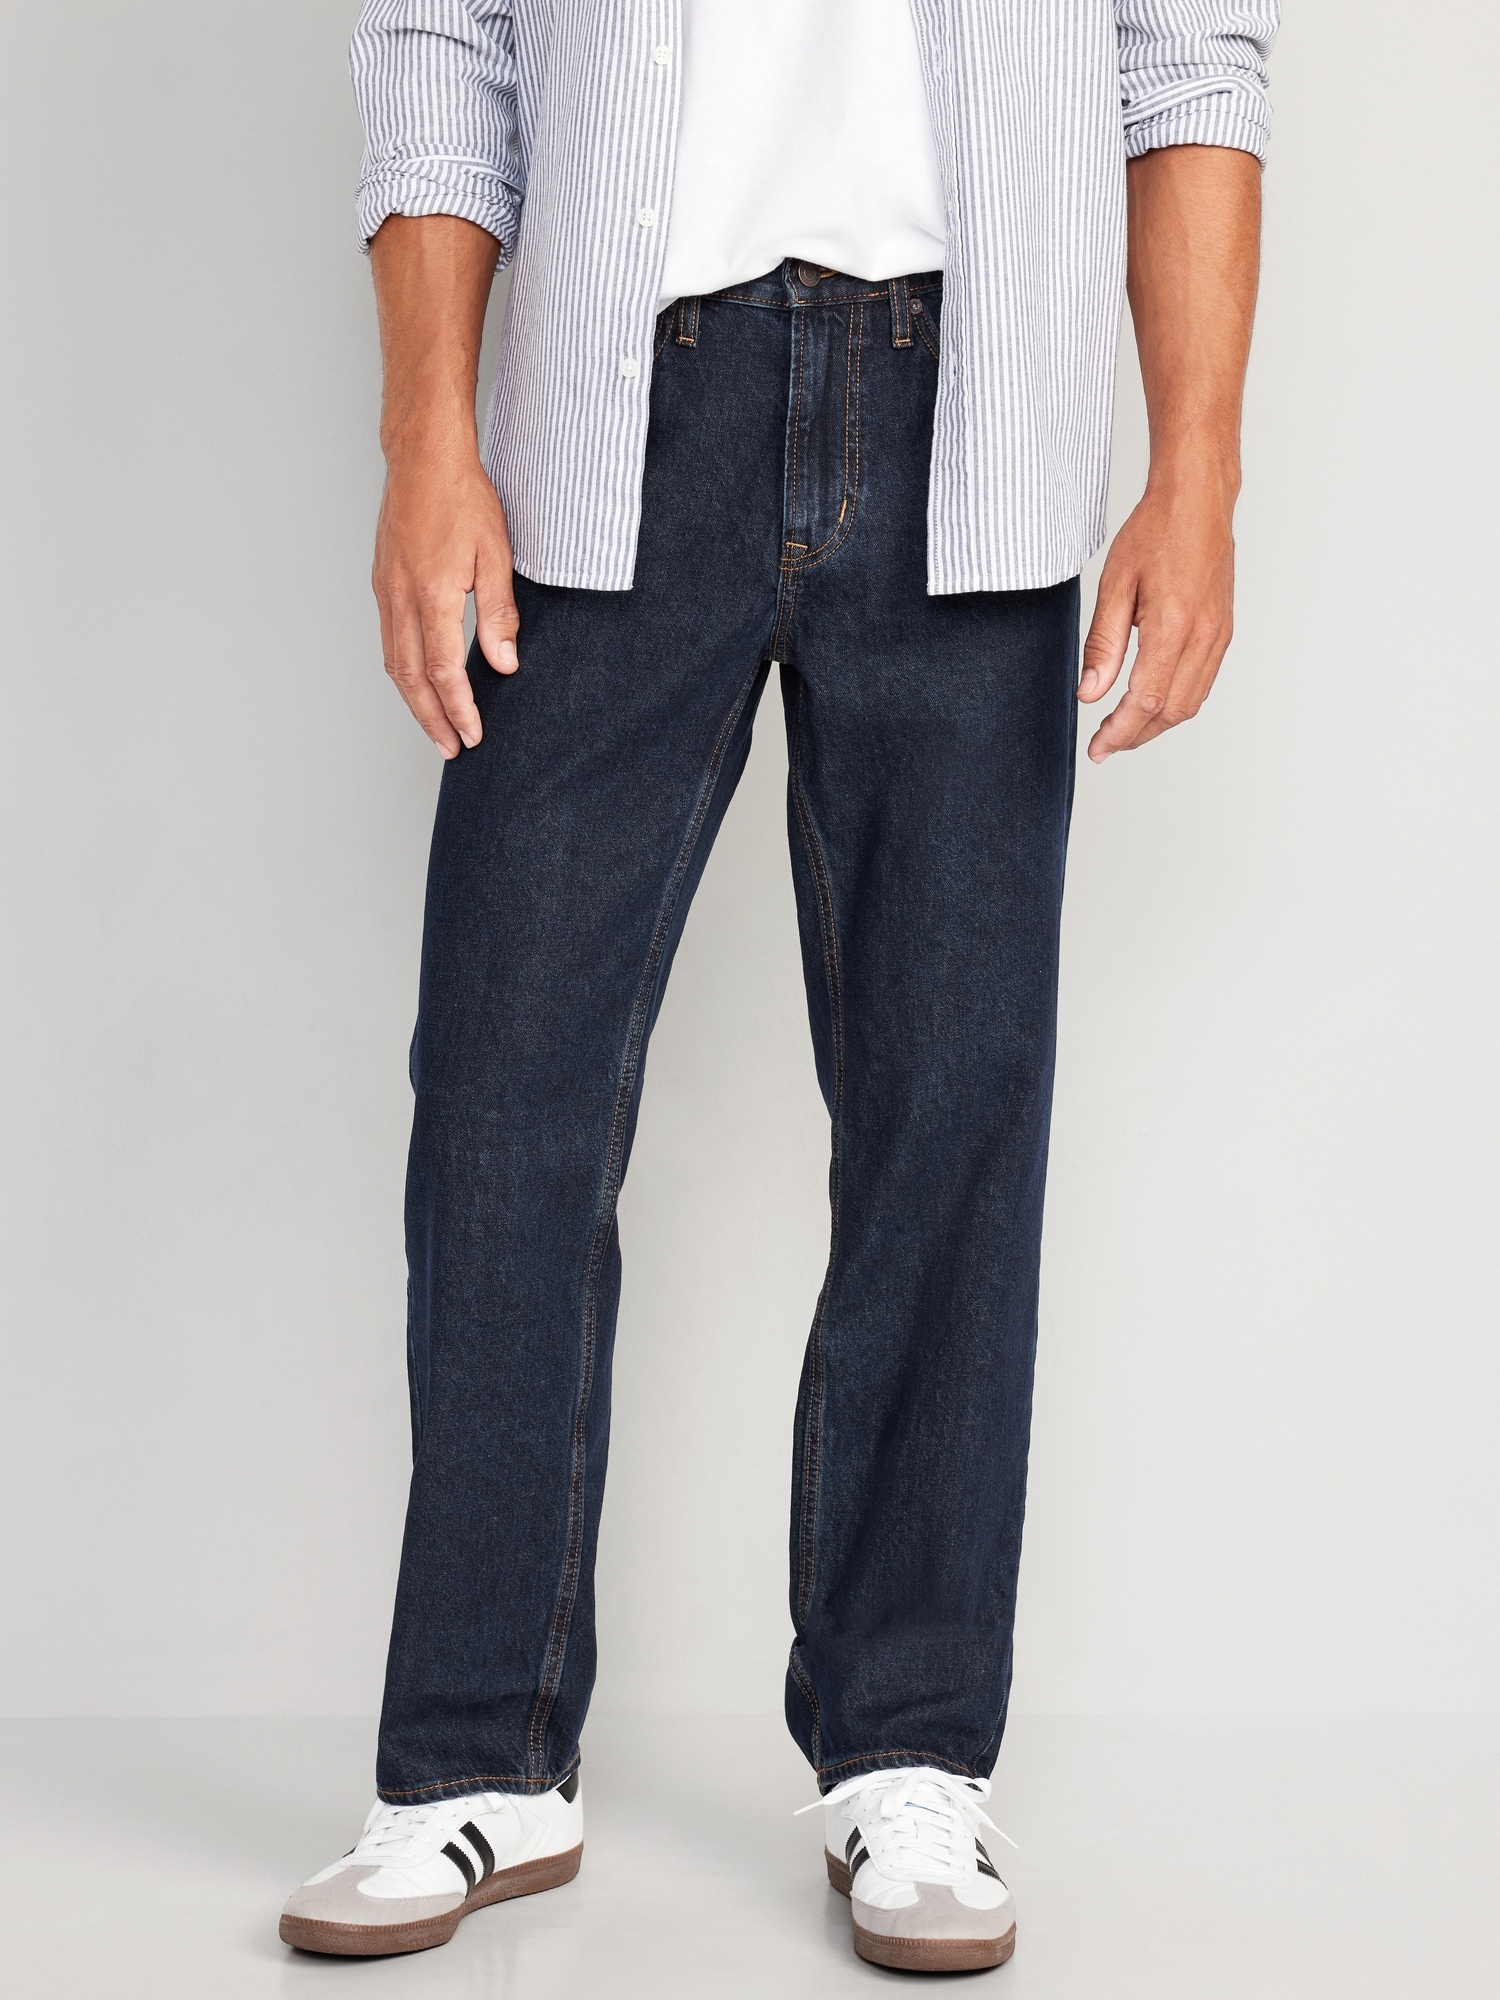 Wow Loose Non-Stretch Jeans